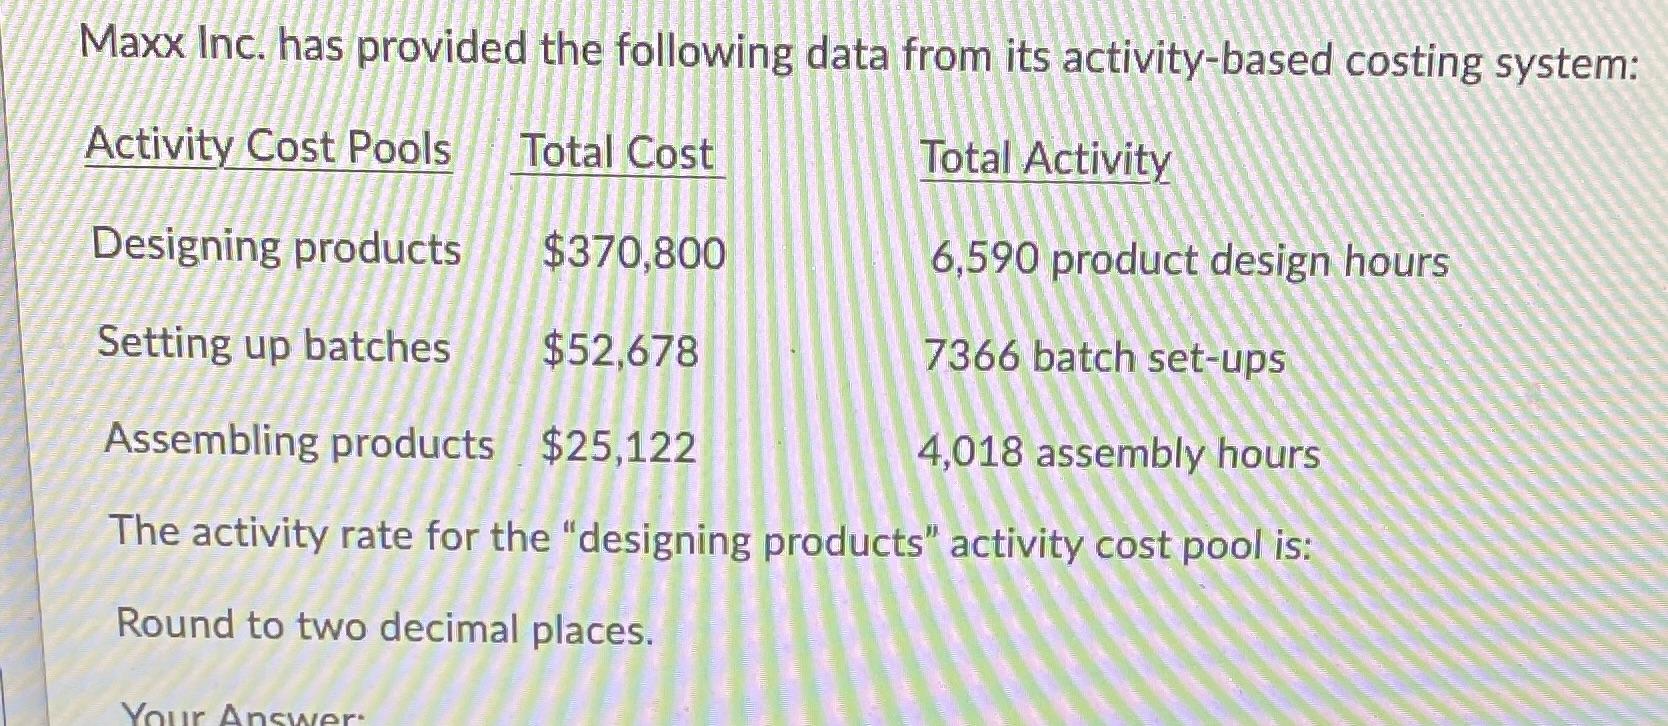 Maxx Inc. has provided the following data from its activity-based costing system: Activity Cost Pools Total